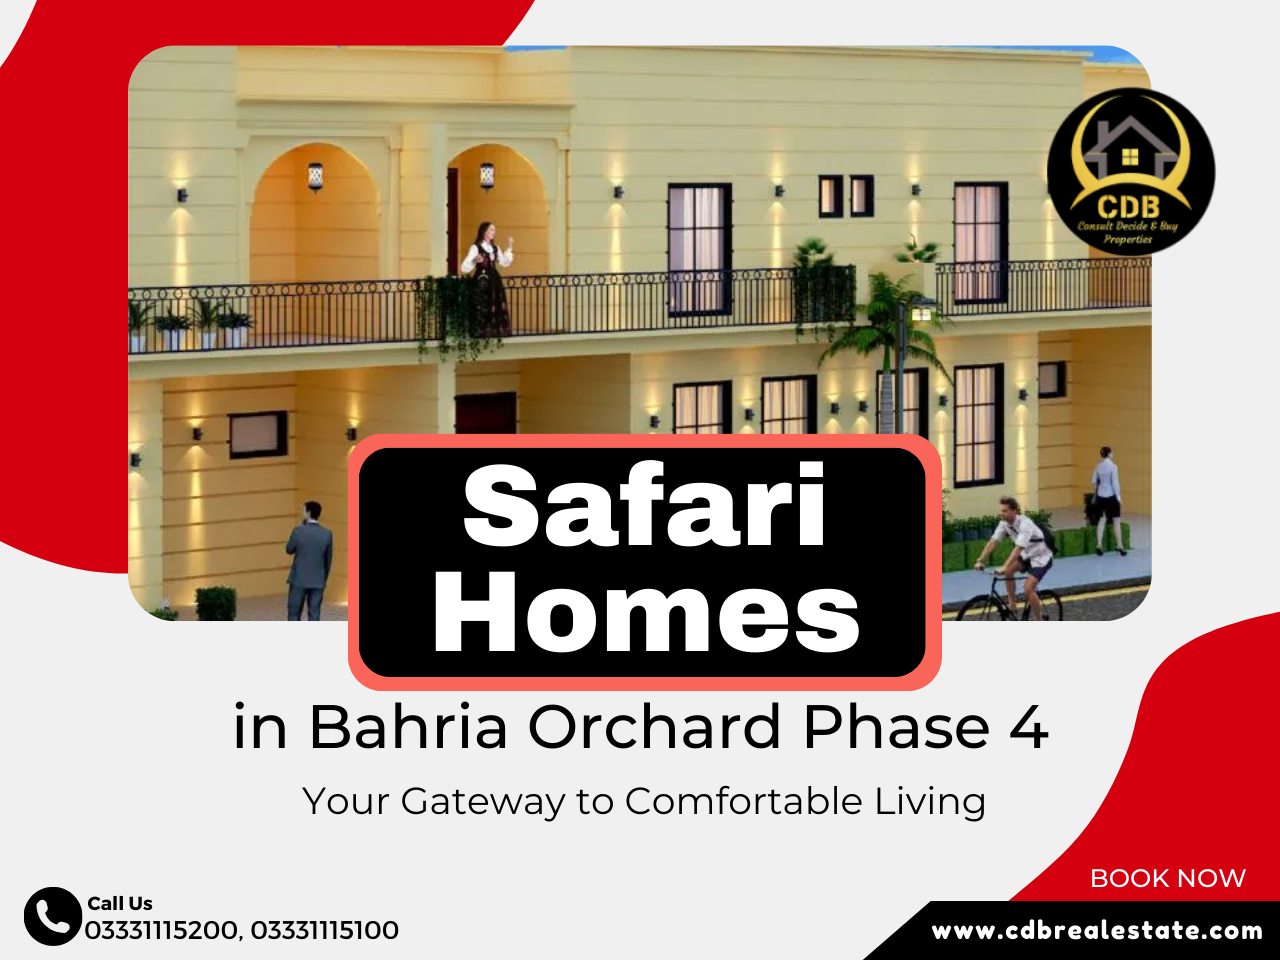 Safari Homes in Bahria Orchard Phase 4: Your Gateway to Comfortable Living